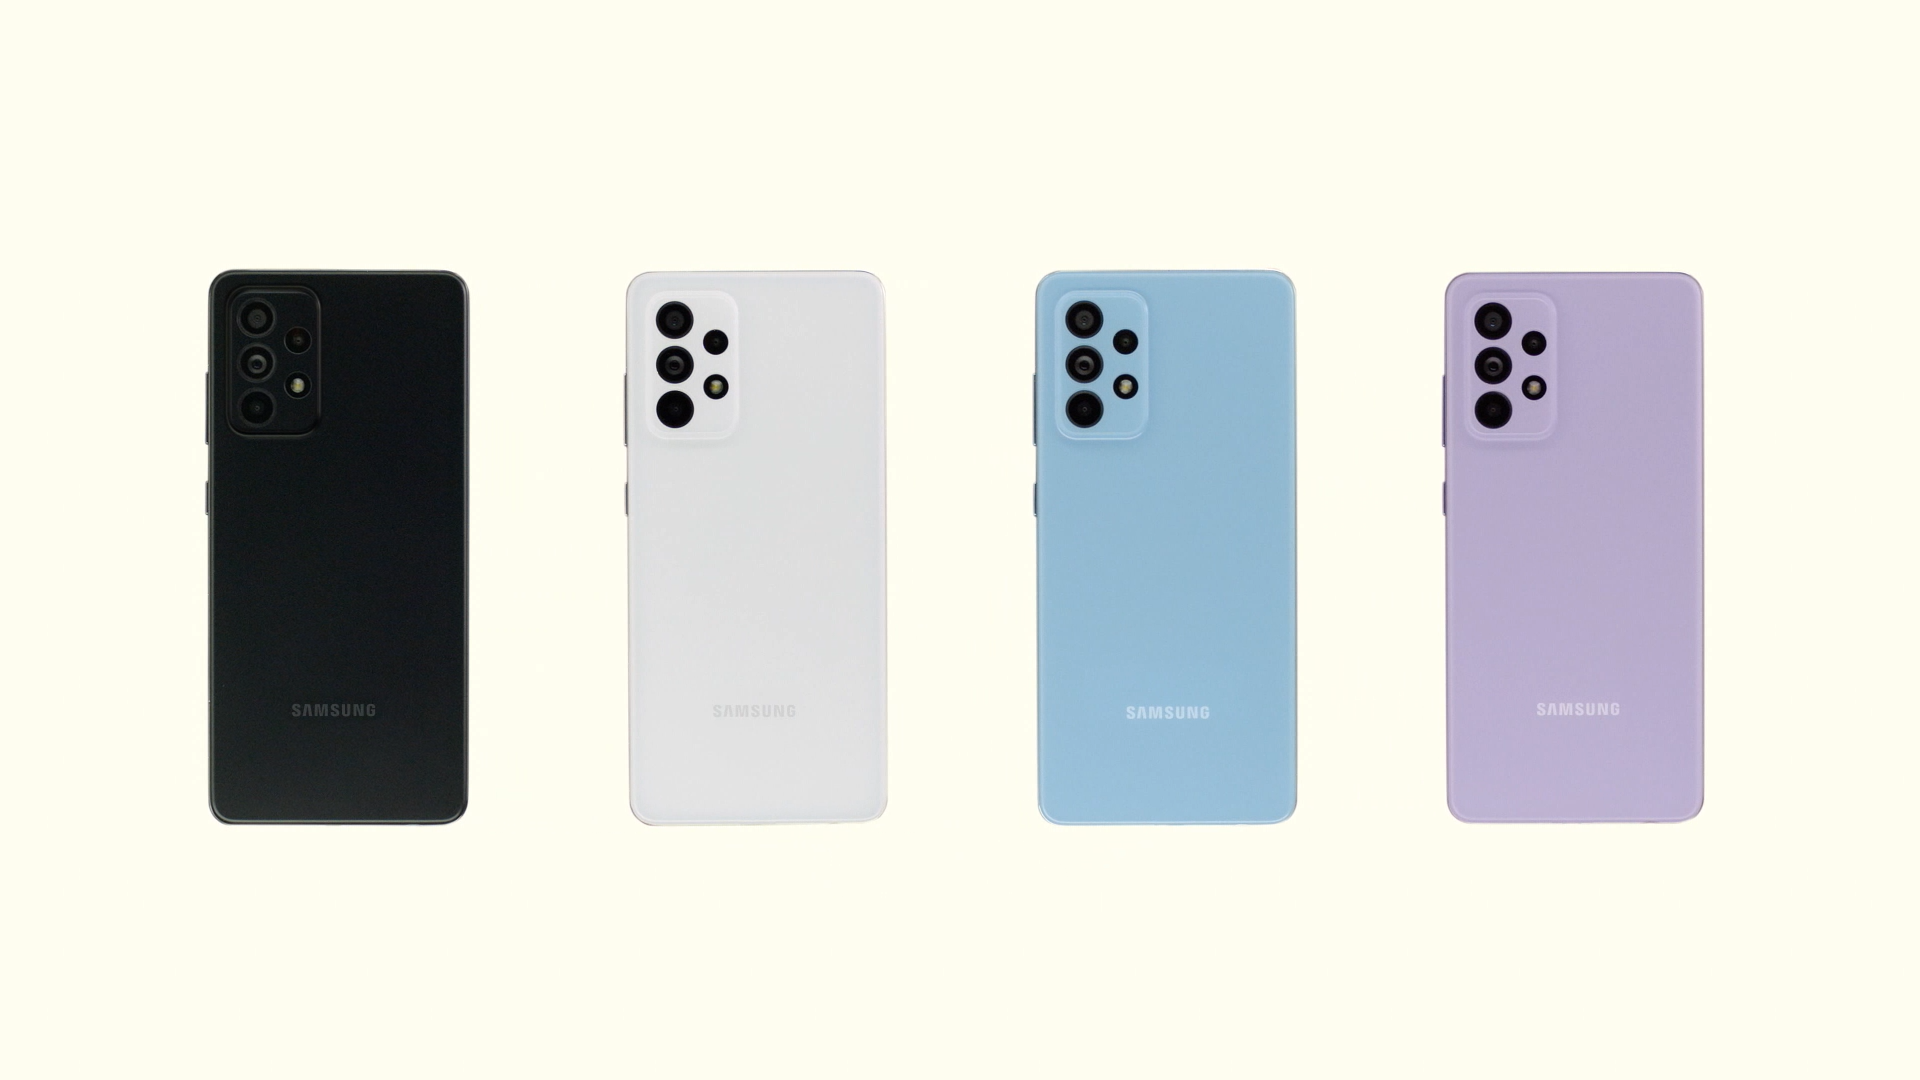 The 2021 Samsung Galaxy A series colors - Samsung announces the Galaxy A52 5G and Galaxy A72, "Awesome is for everyone!"